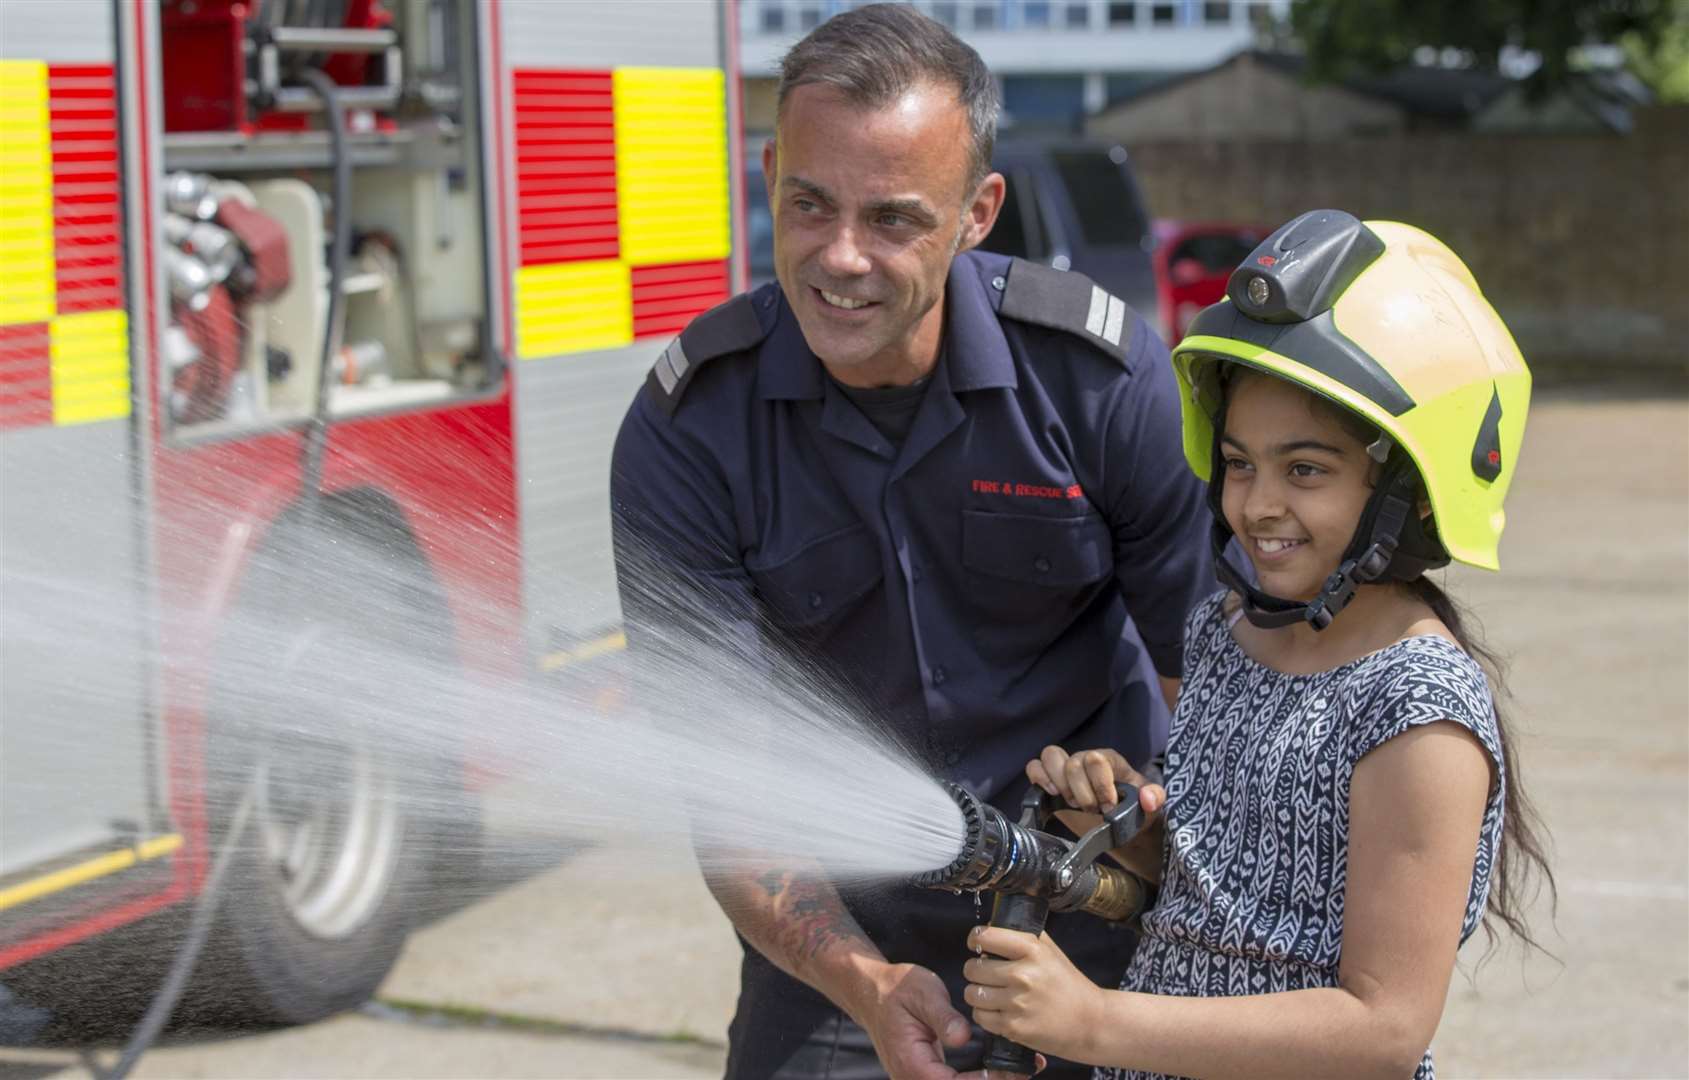 Kent Fire and Rescue open days